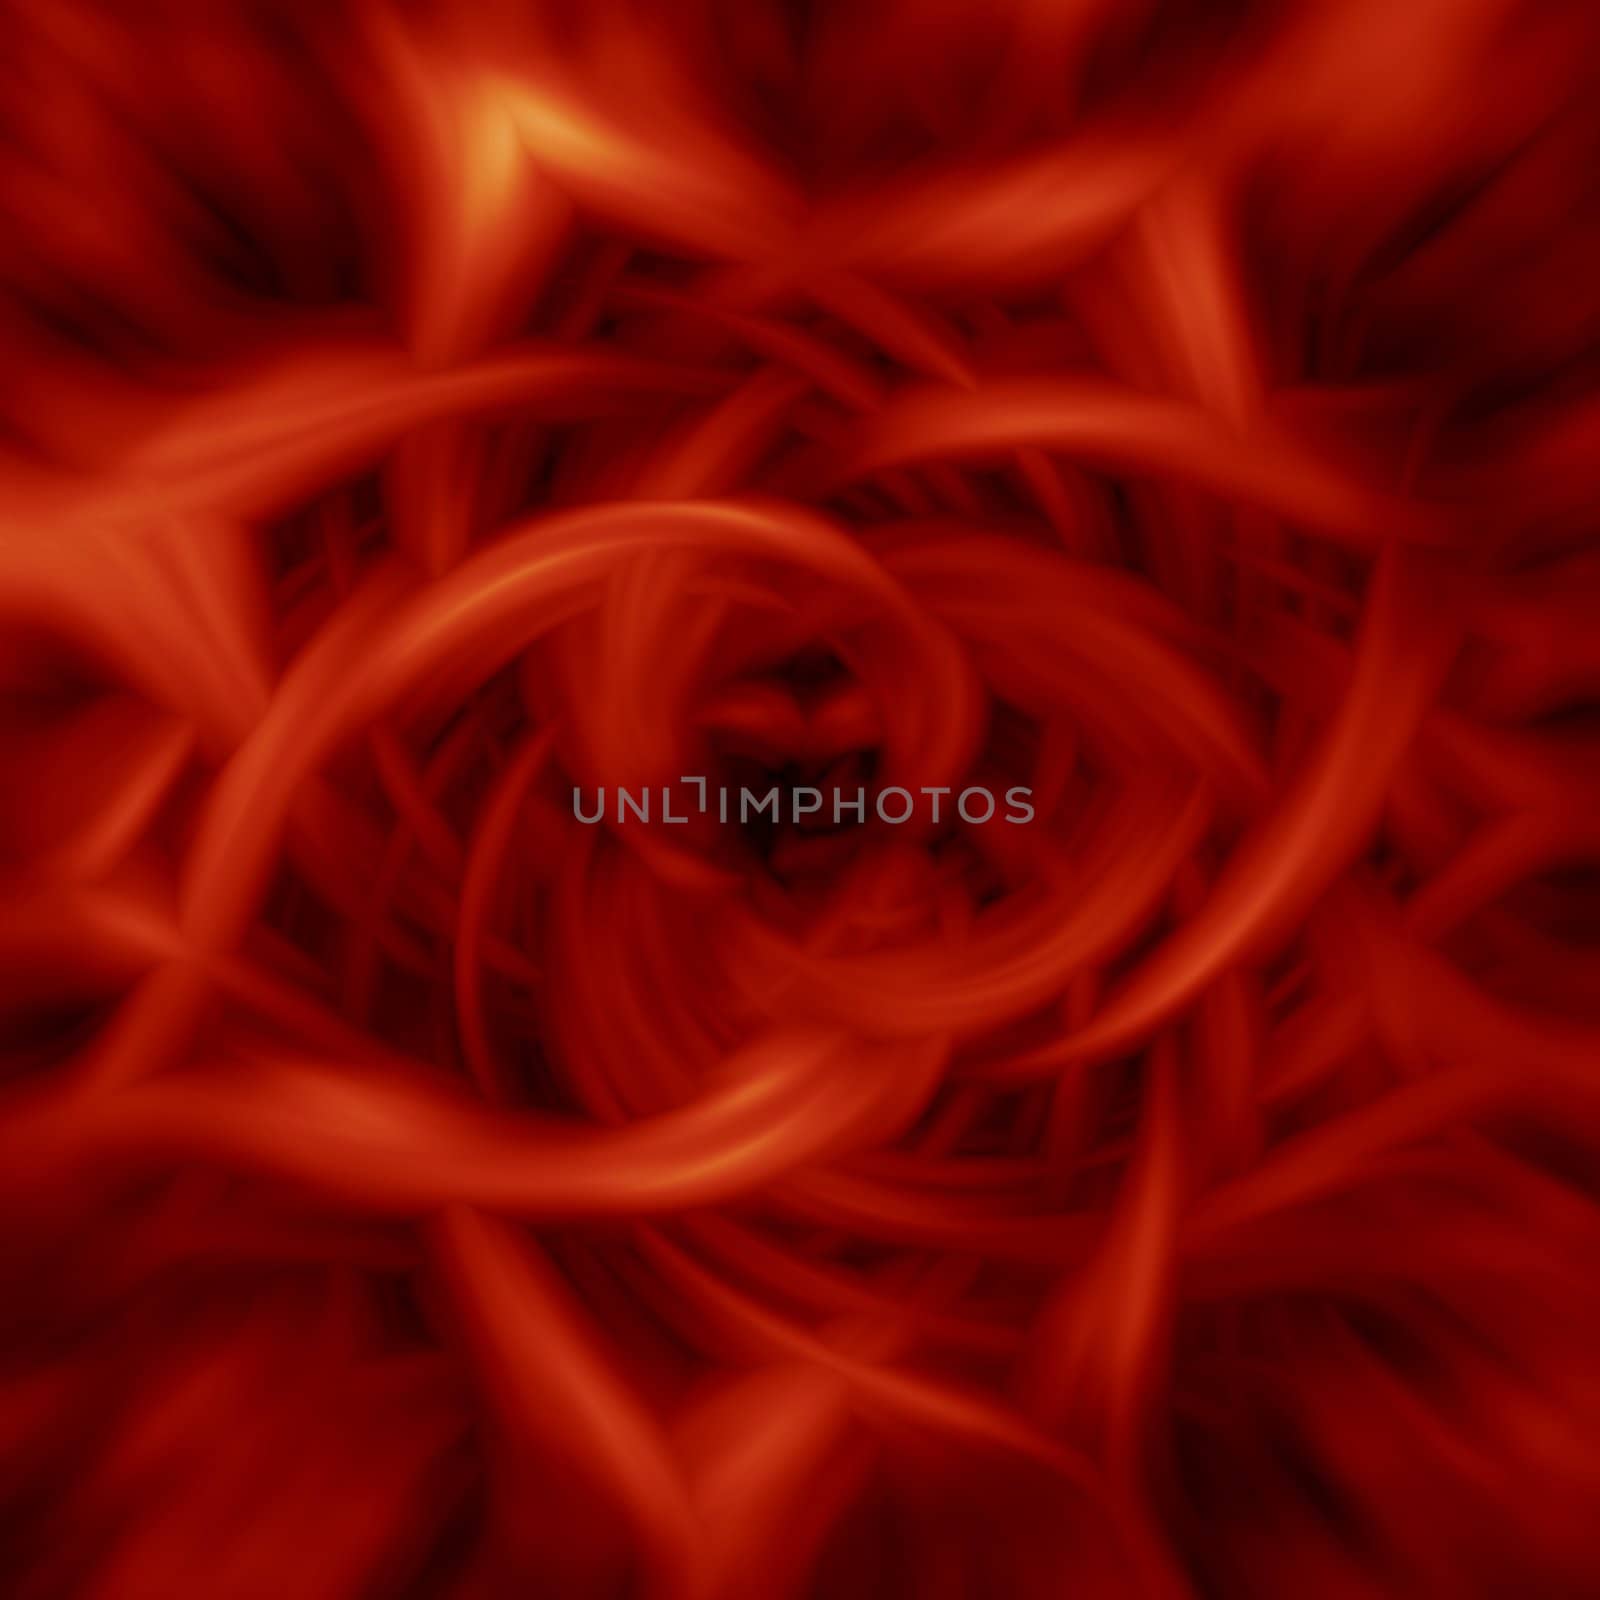 Different design ob flames creating a background or backdrop